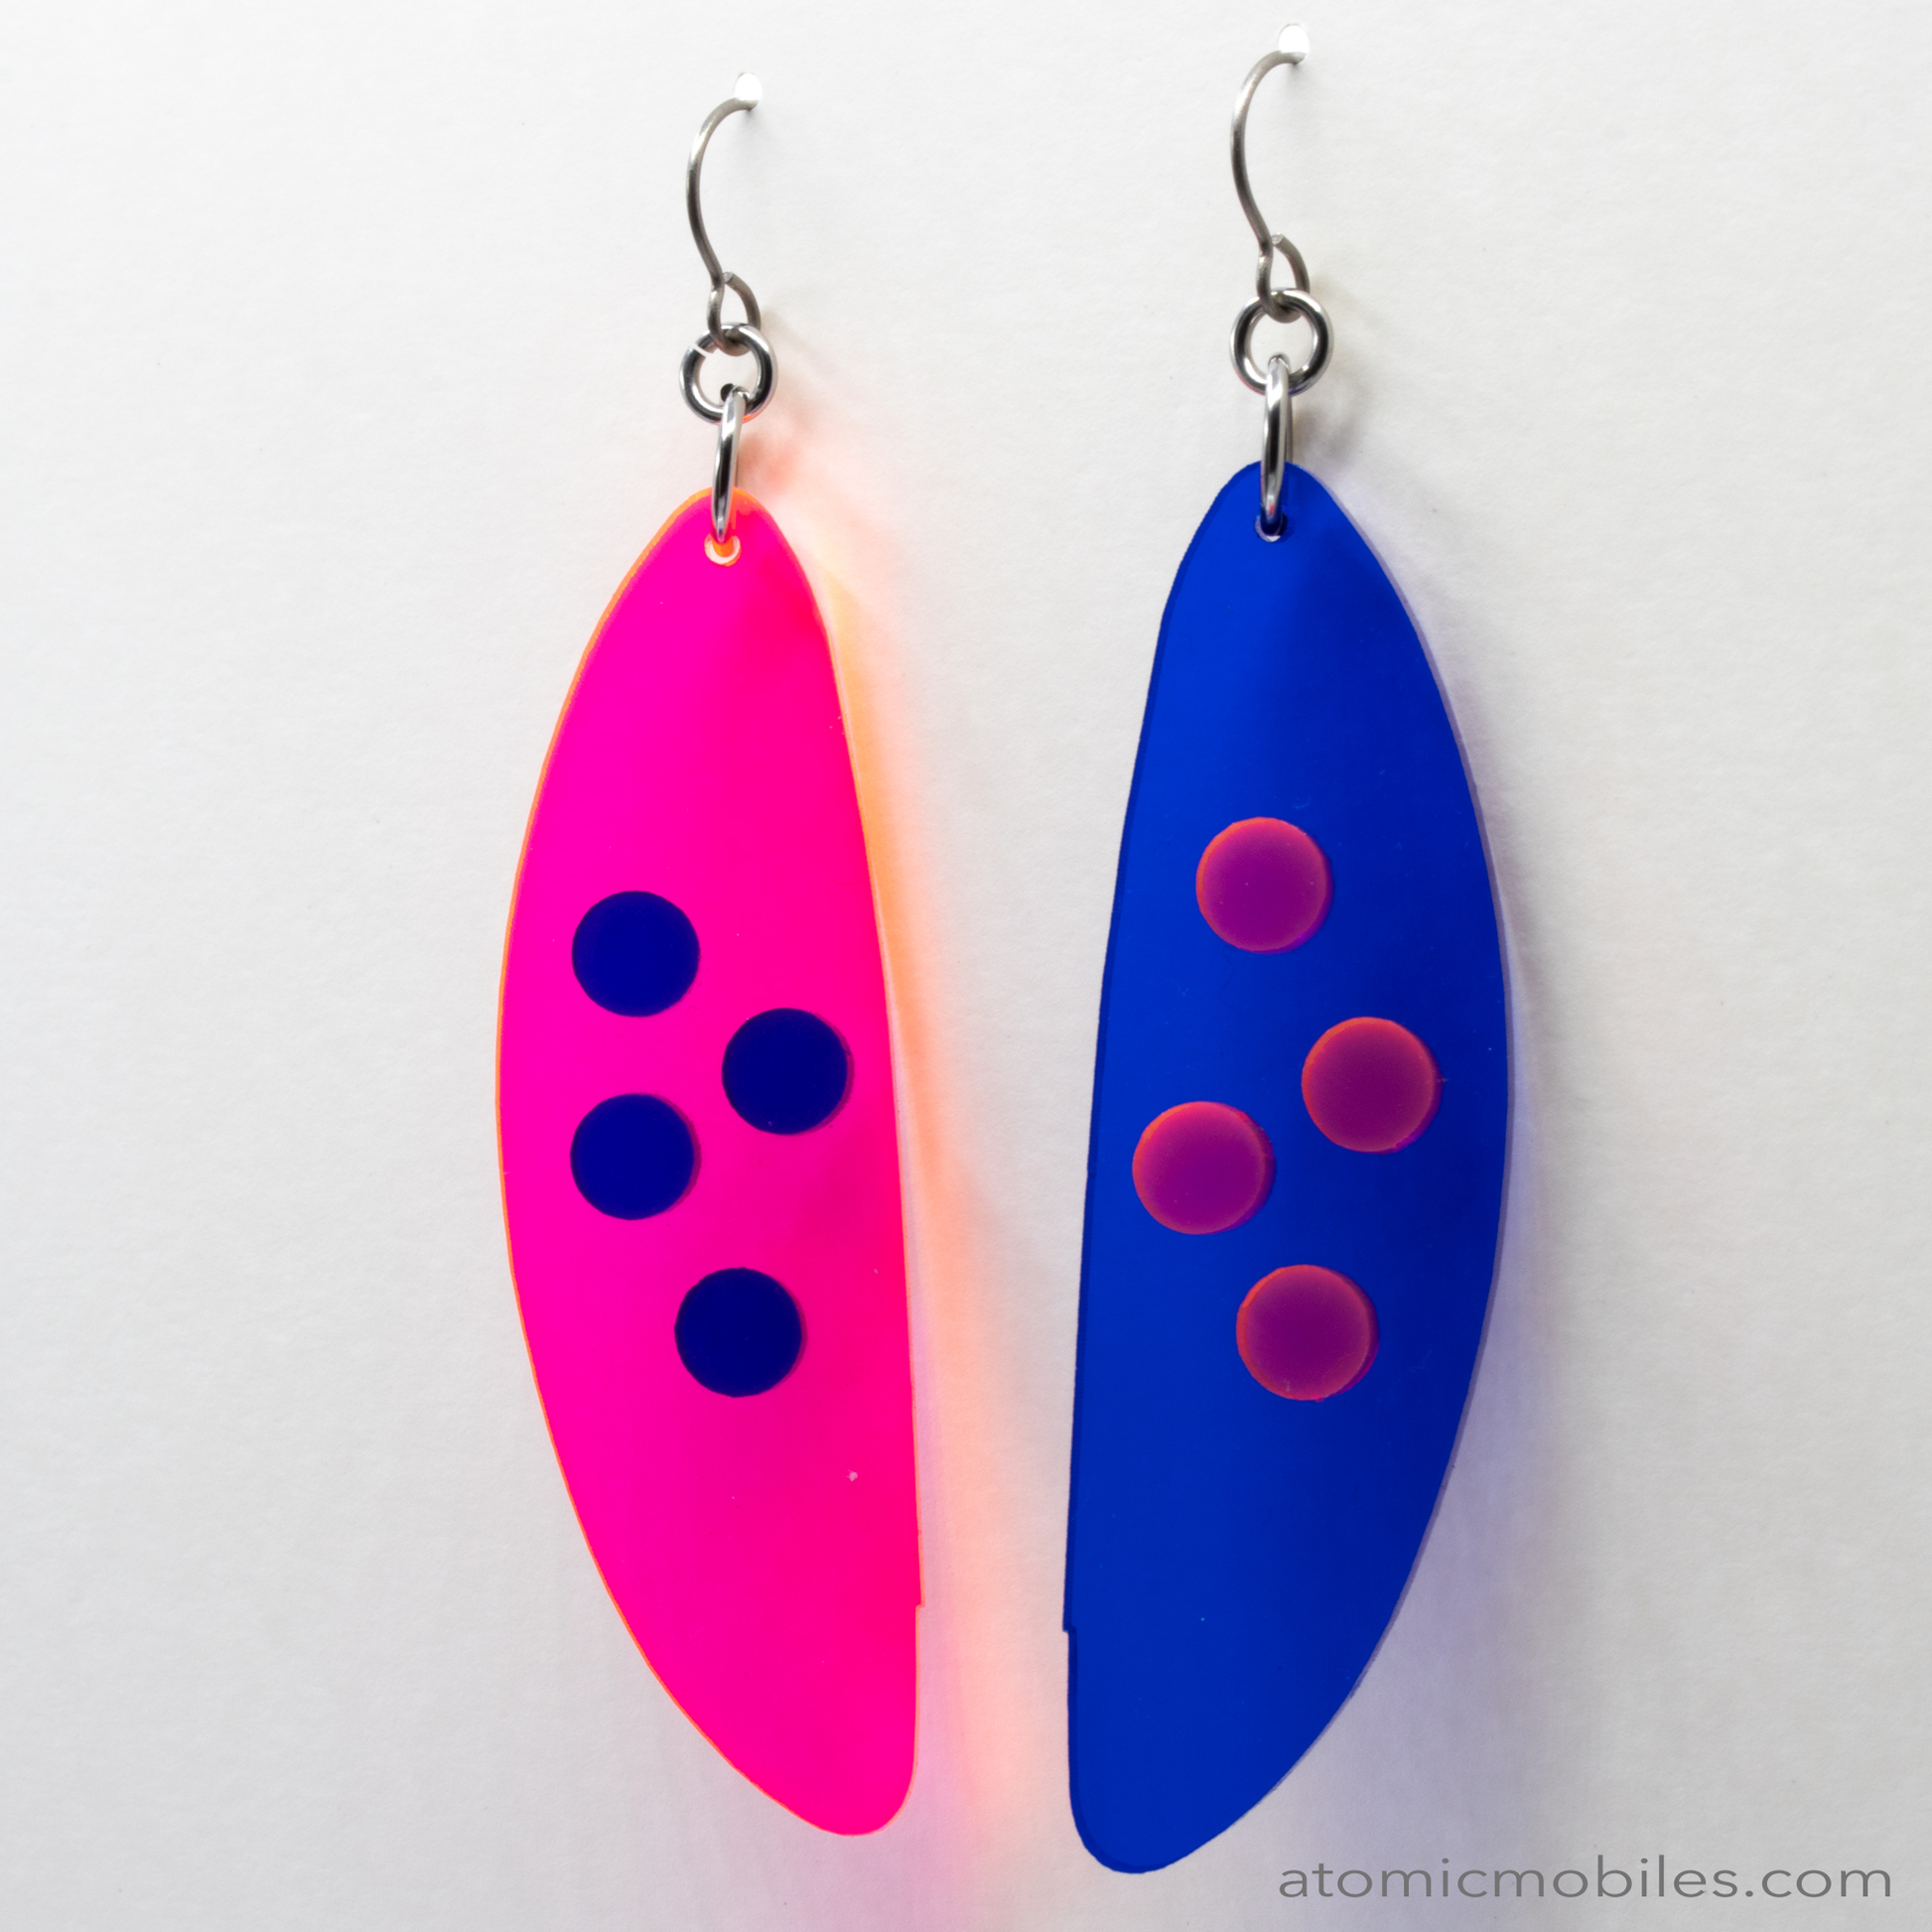 POPdots modern retro statement earrings in Neon Fluorescent Hot Pink and Clear Navy Blue acrylic by AtomicMobiles.com